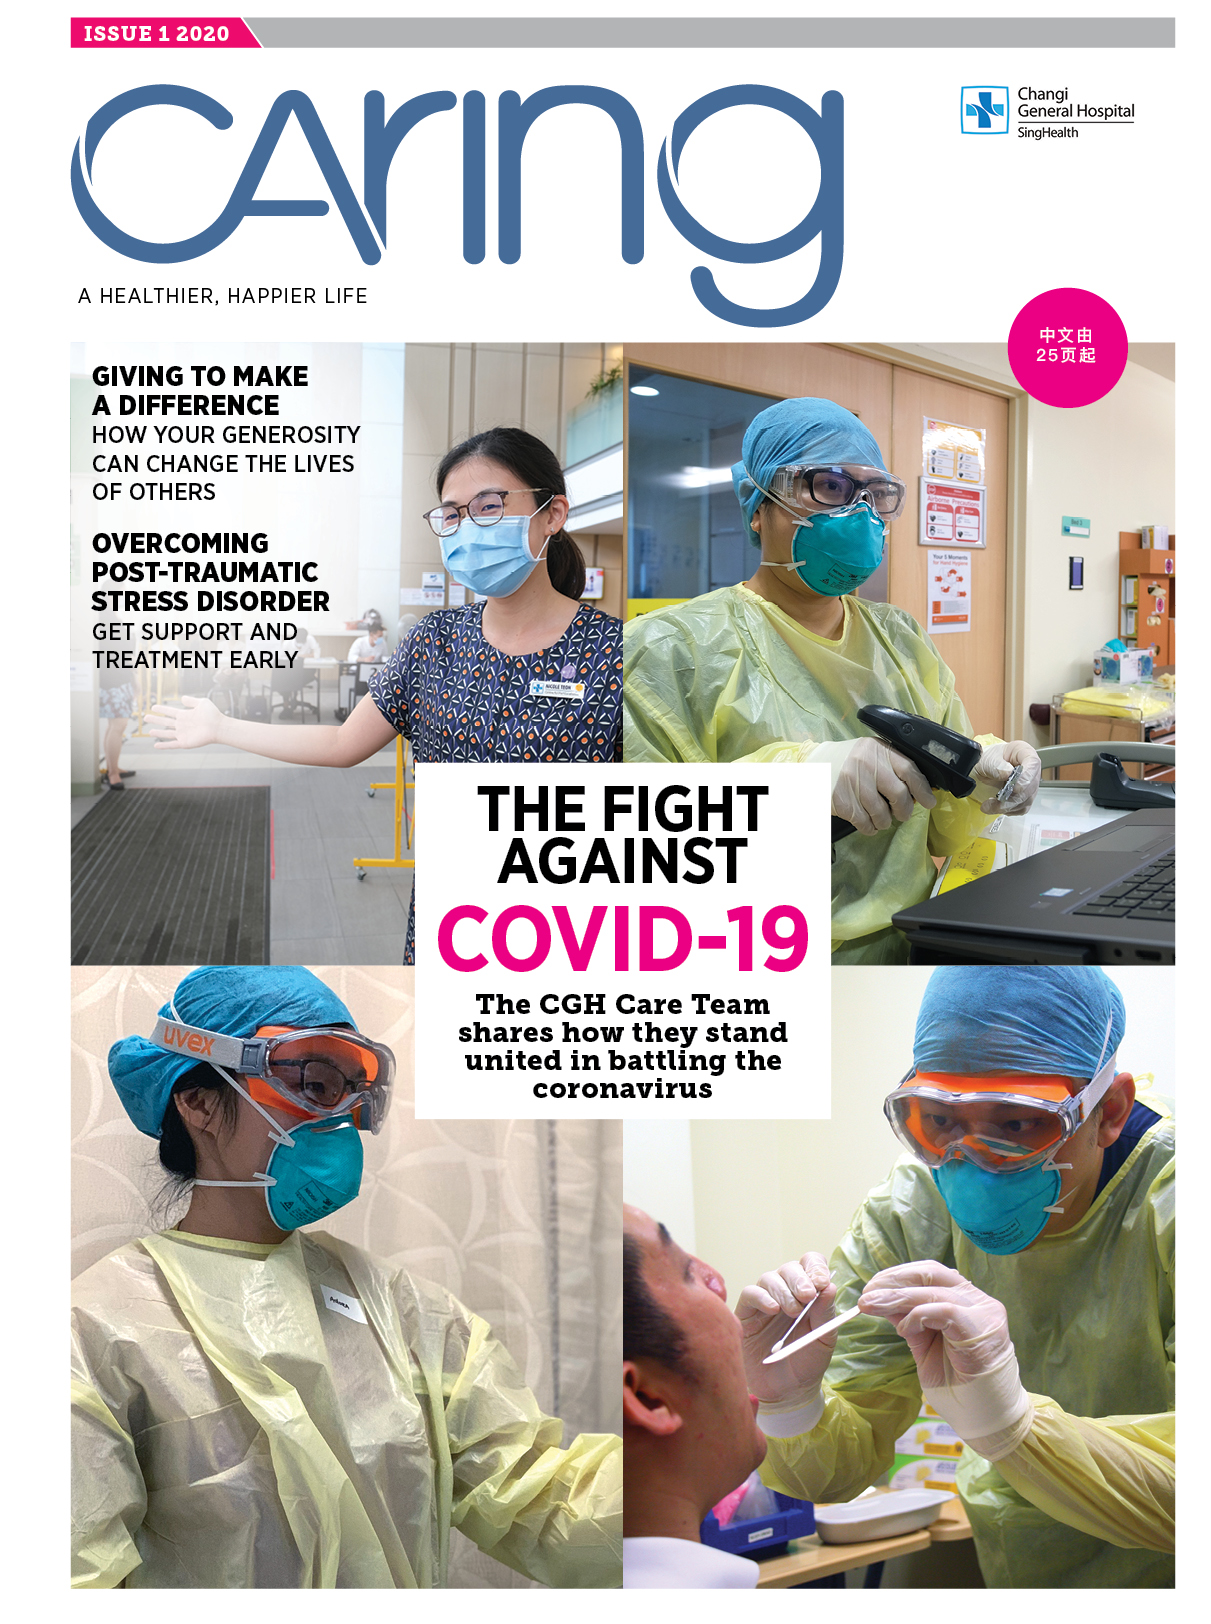 At the heart of the fight against Covid-19 is the manufacture of